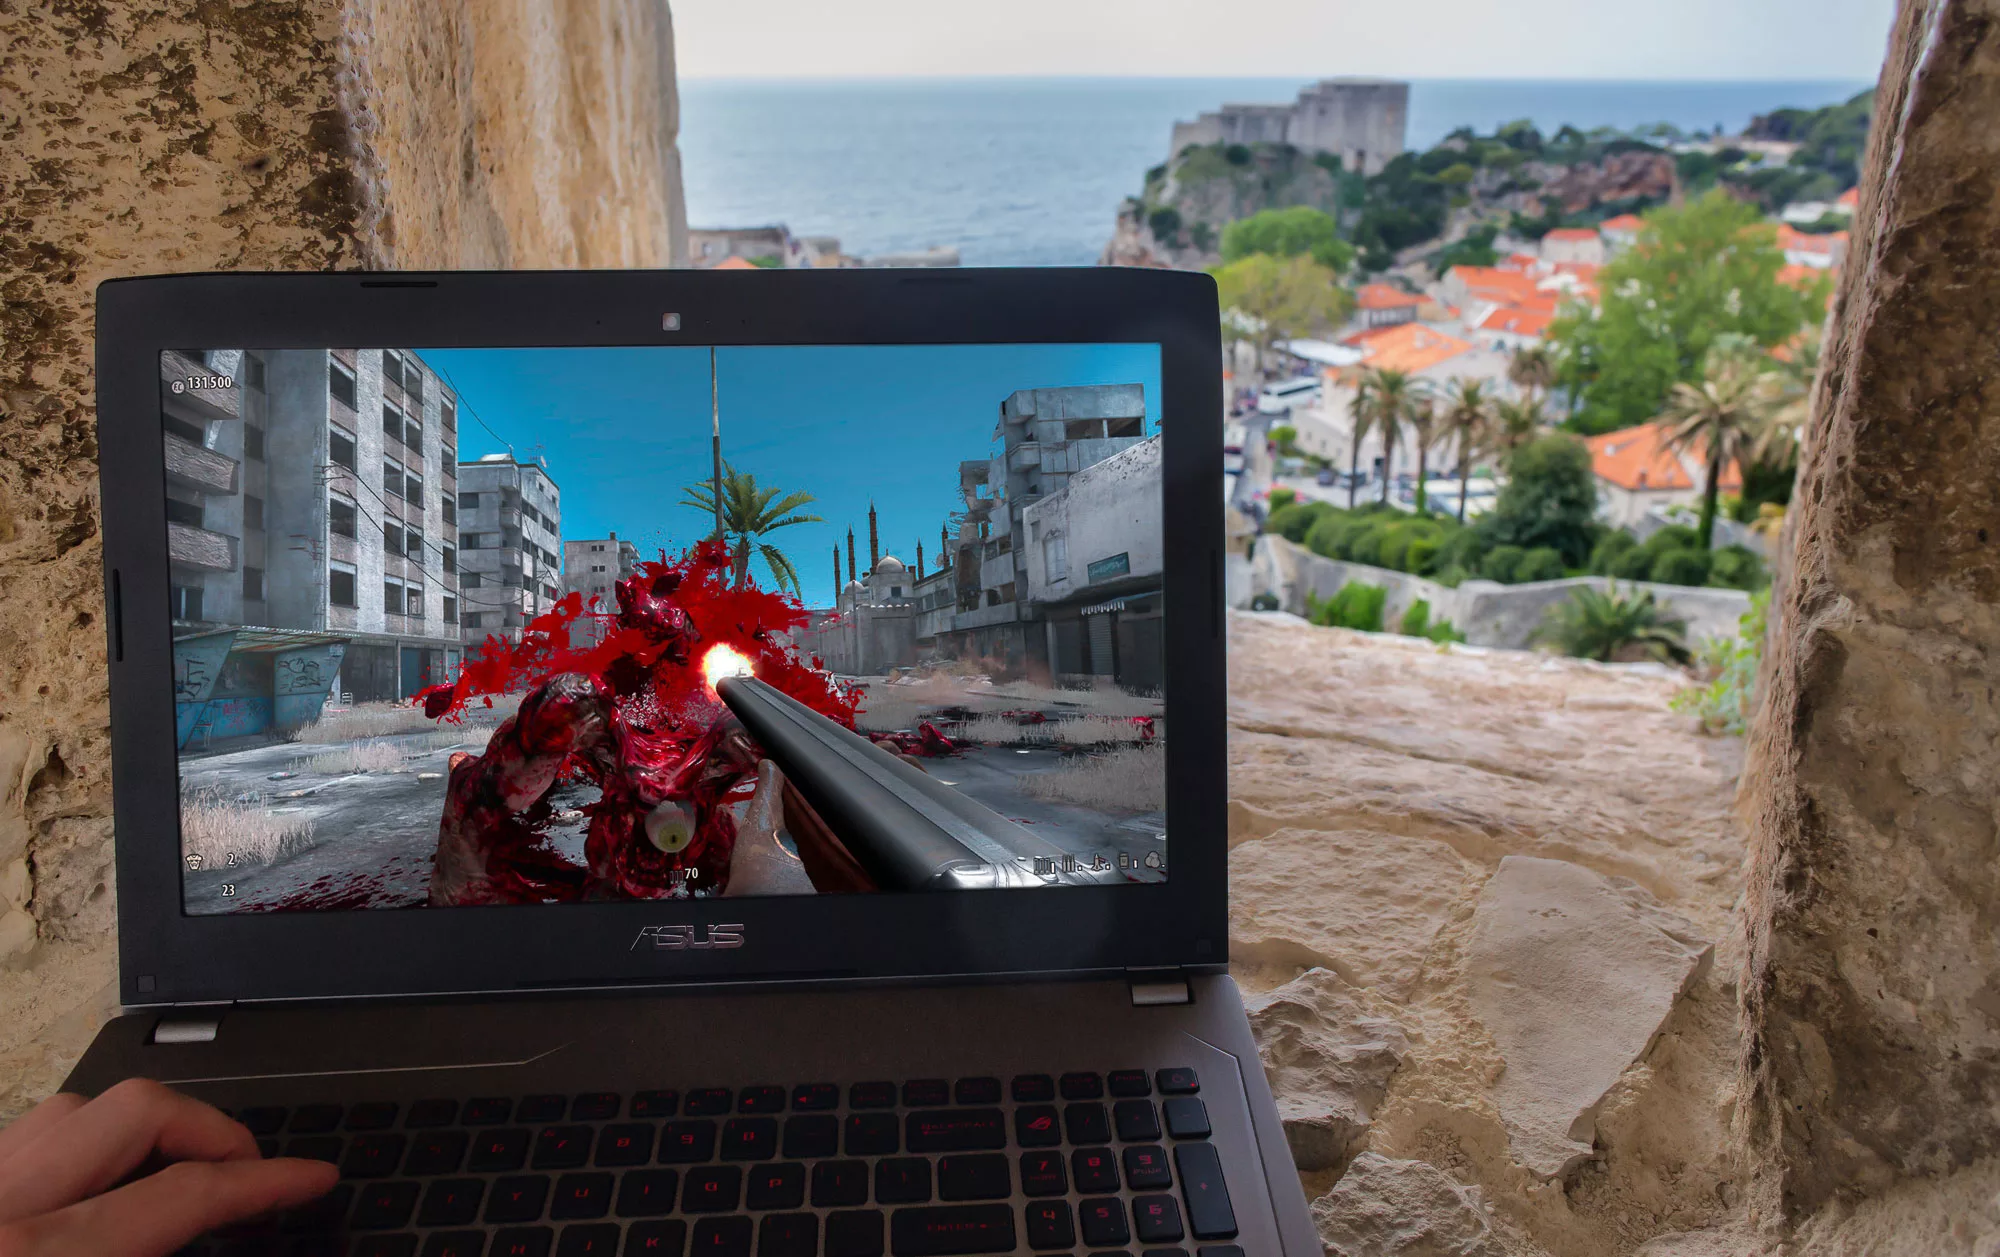 Gaming around the world with the ROG Strix GL502VS laptop | ROG - Republic  of Gamers Global